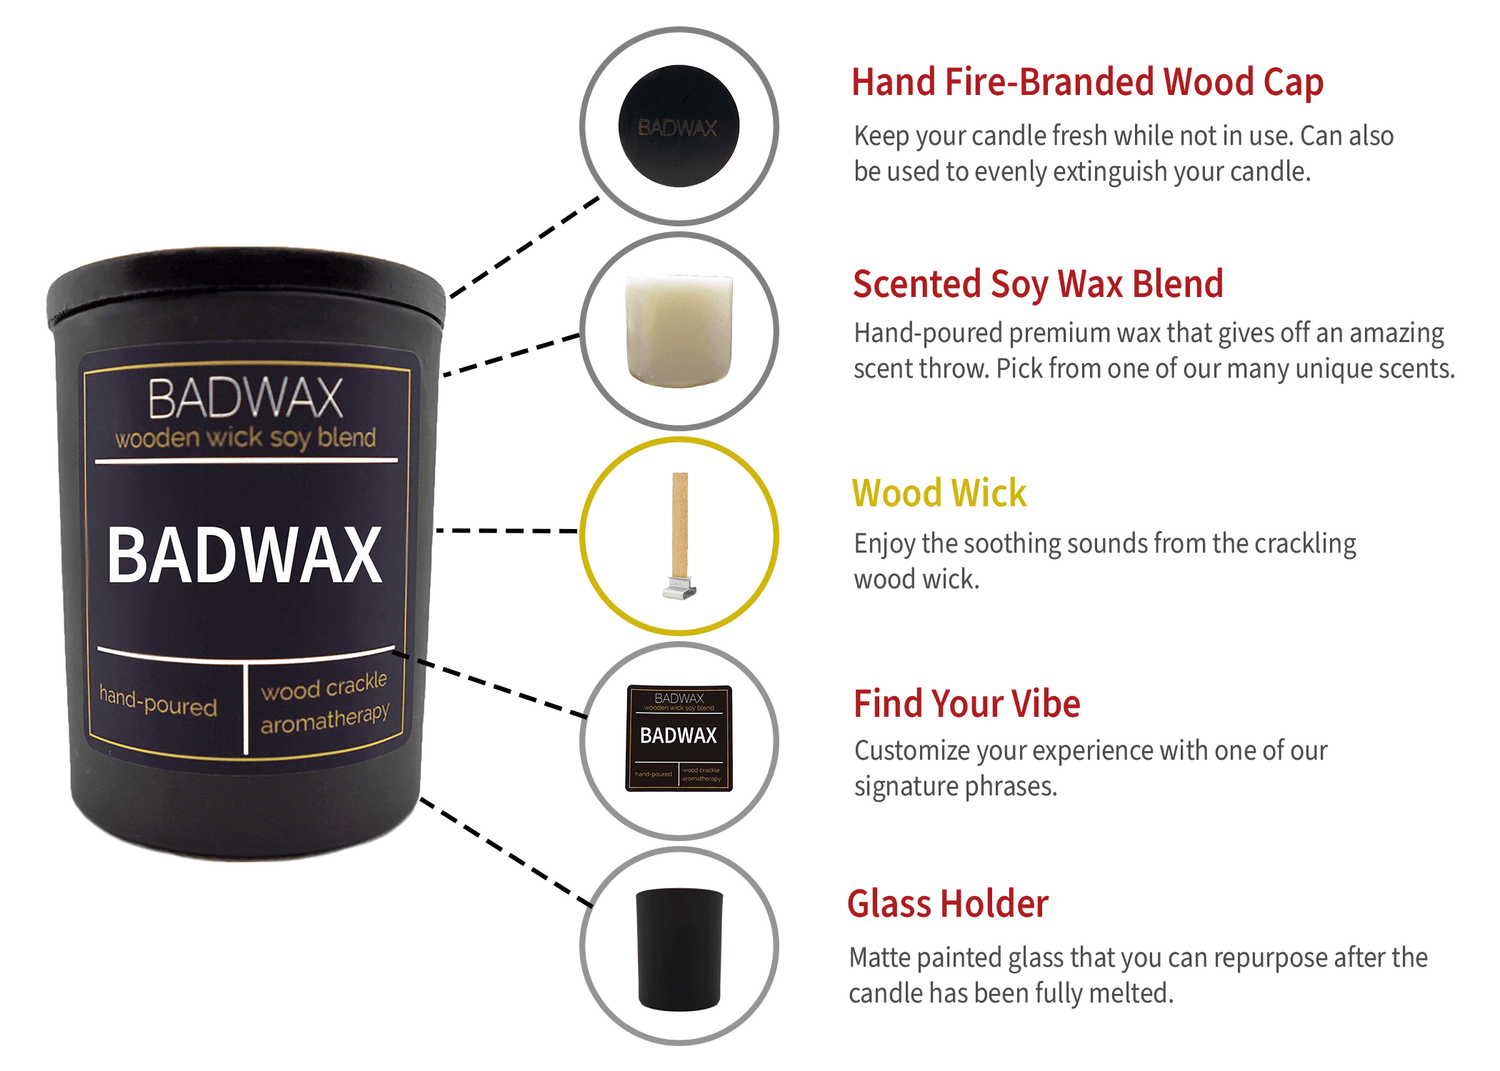 Don’t Do Drugs In Our Bathroom™ - Woodwick Candle - BADWAX